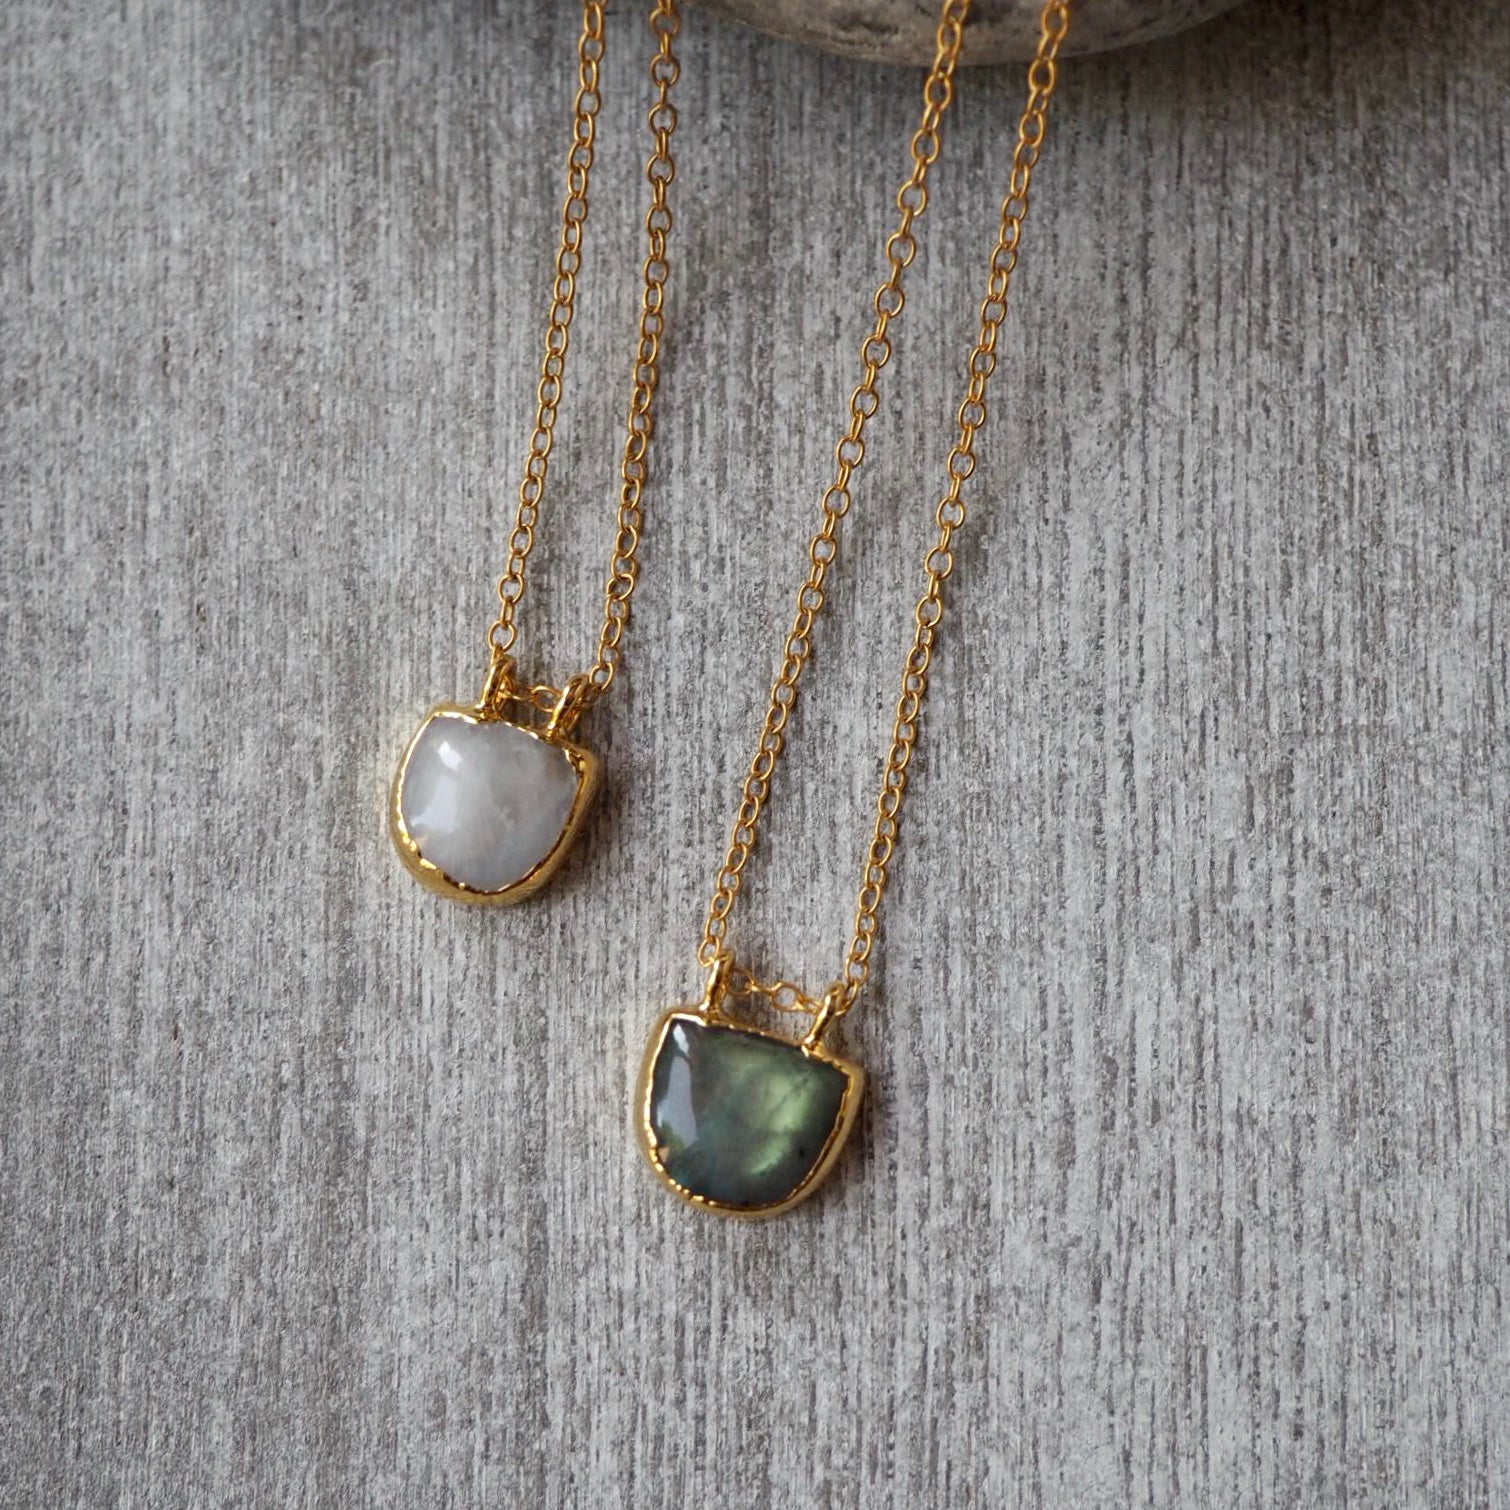 14k gold filled chain with Moonstone or Labradorite